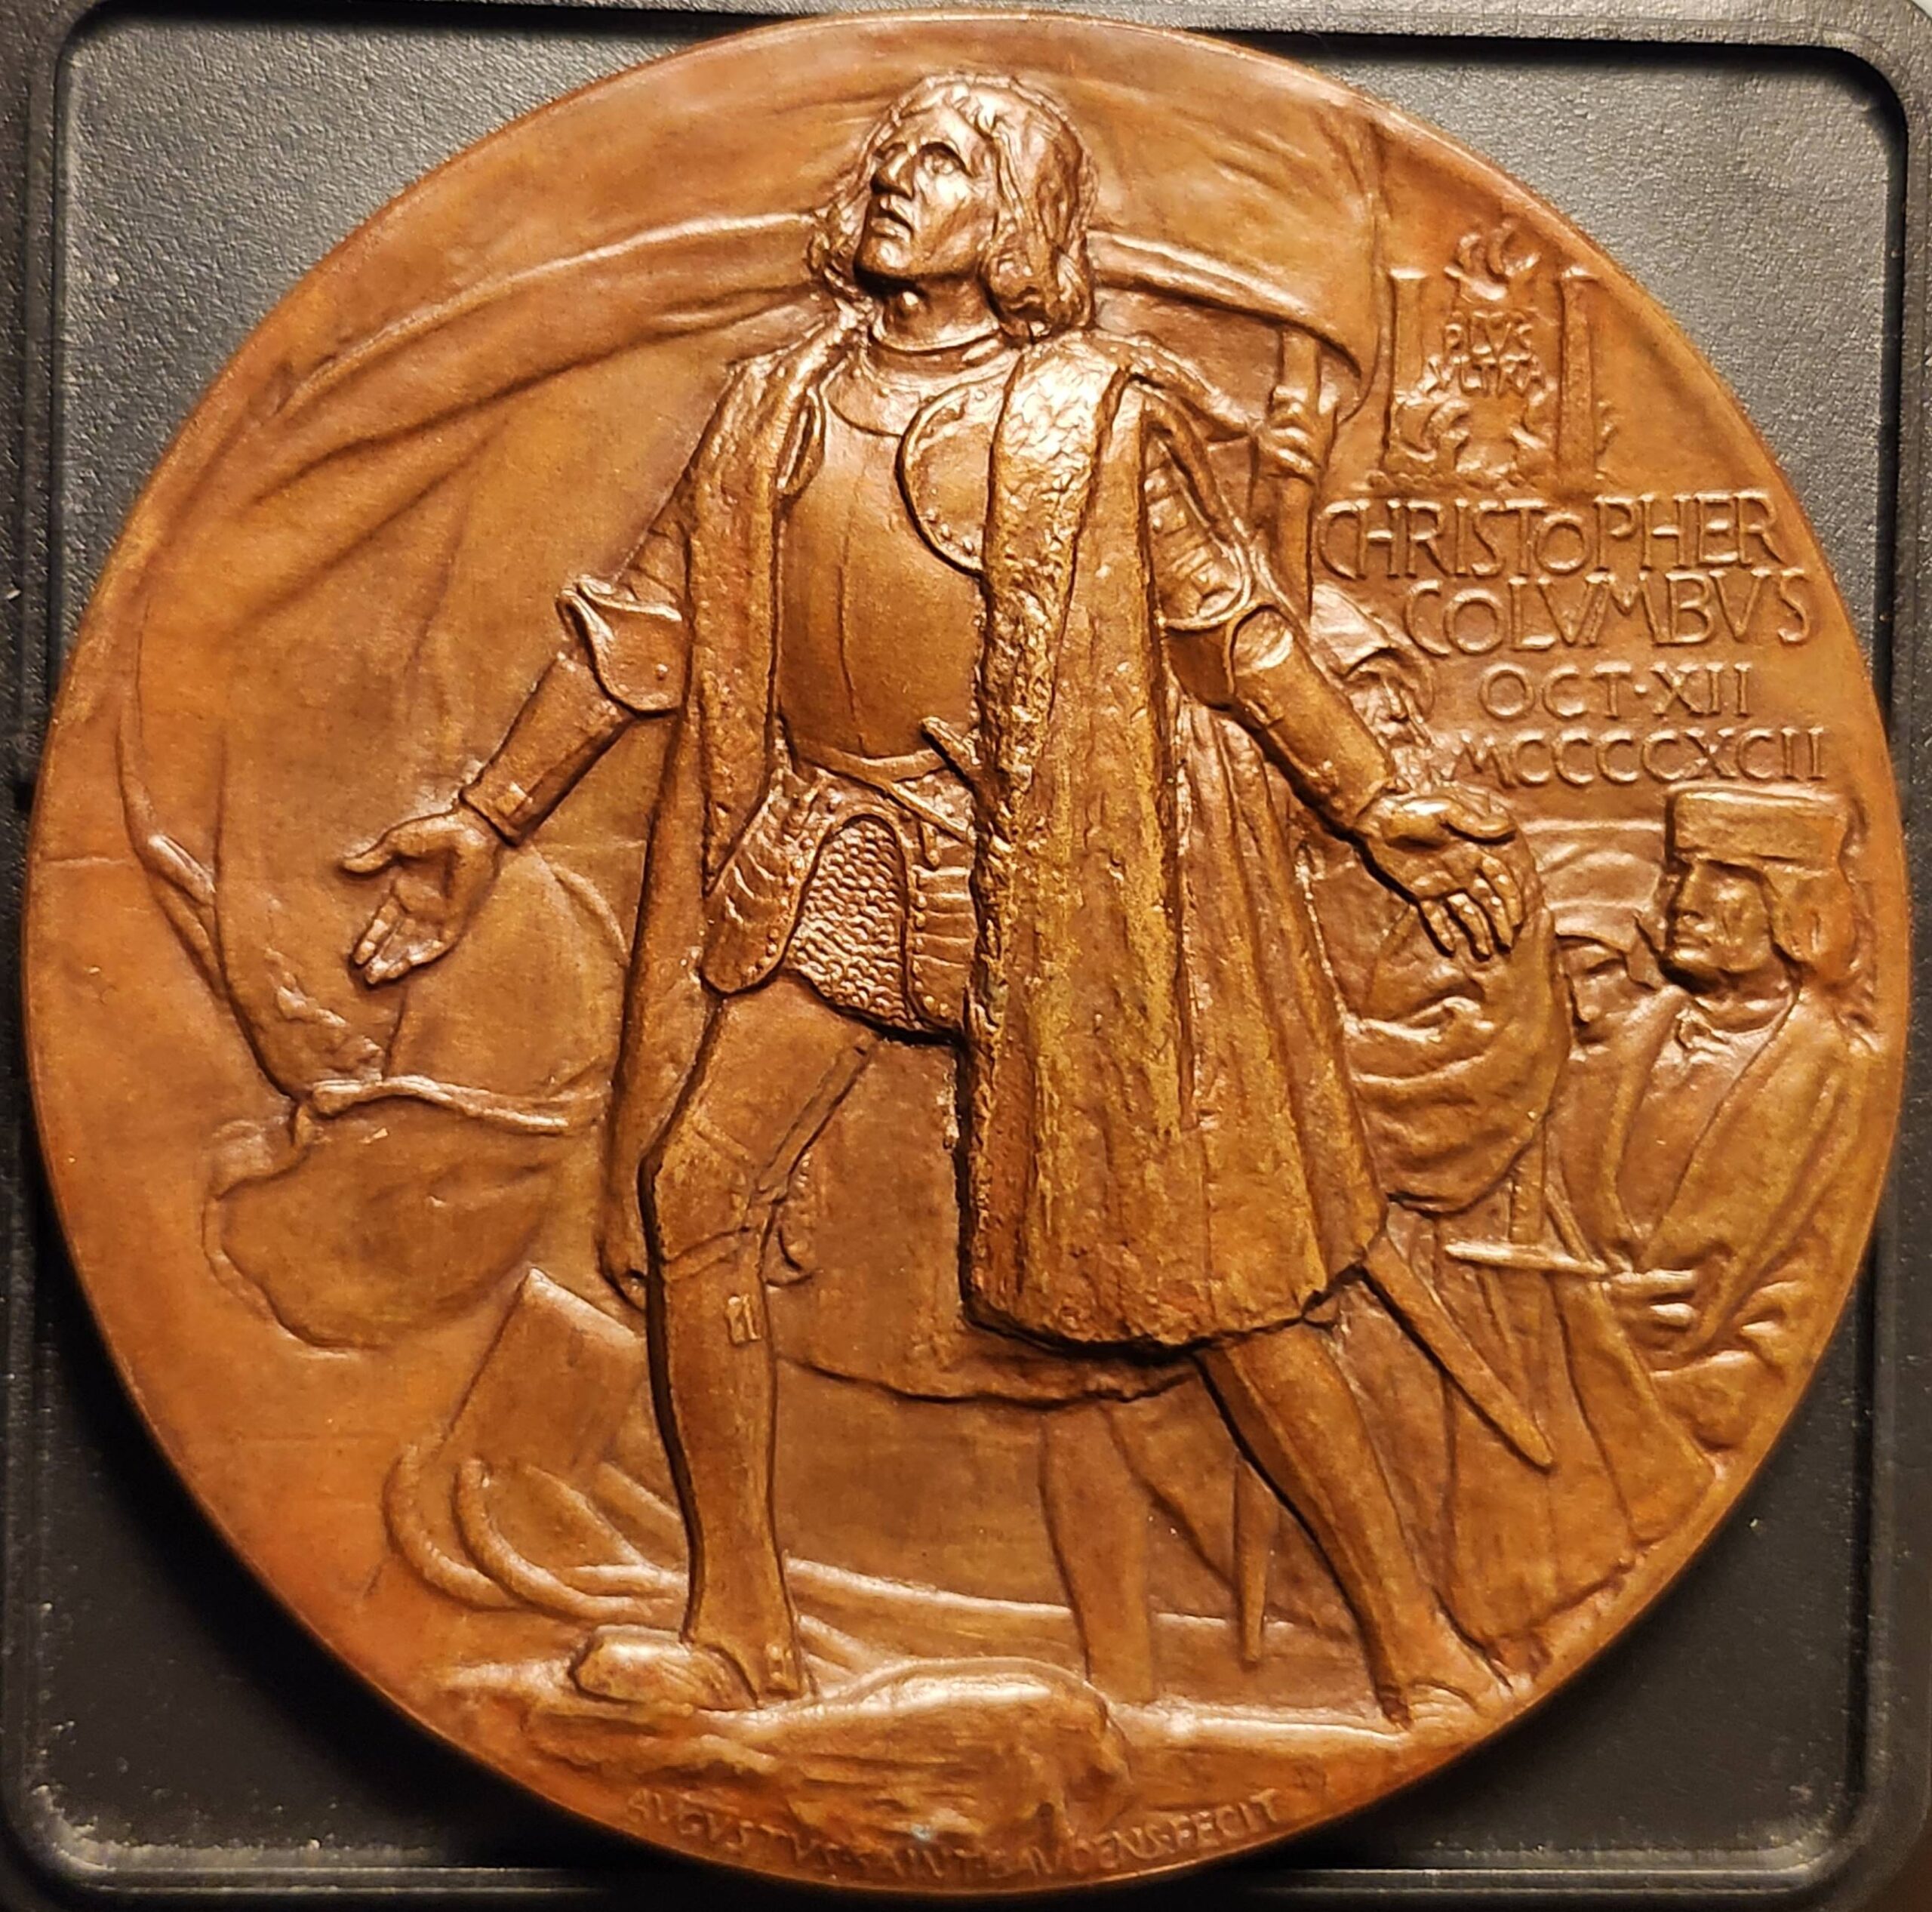 Award Medals of the 1893 Chicago World’s Fair